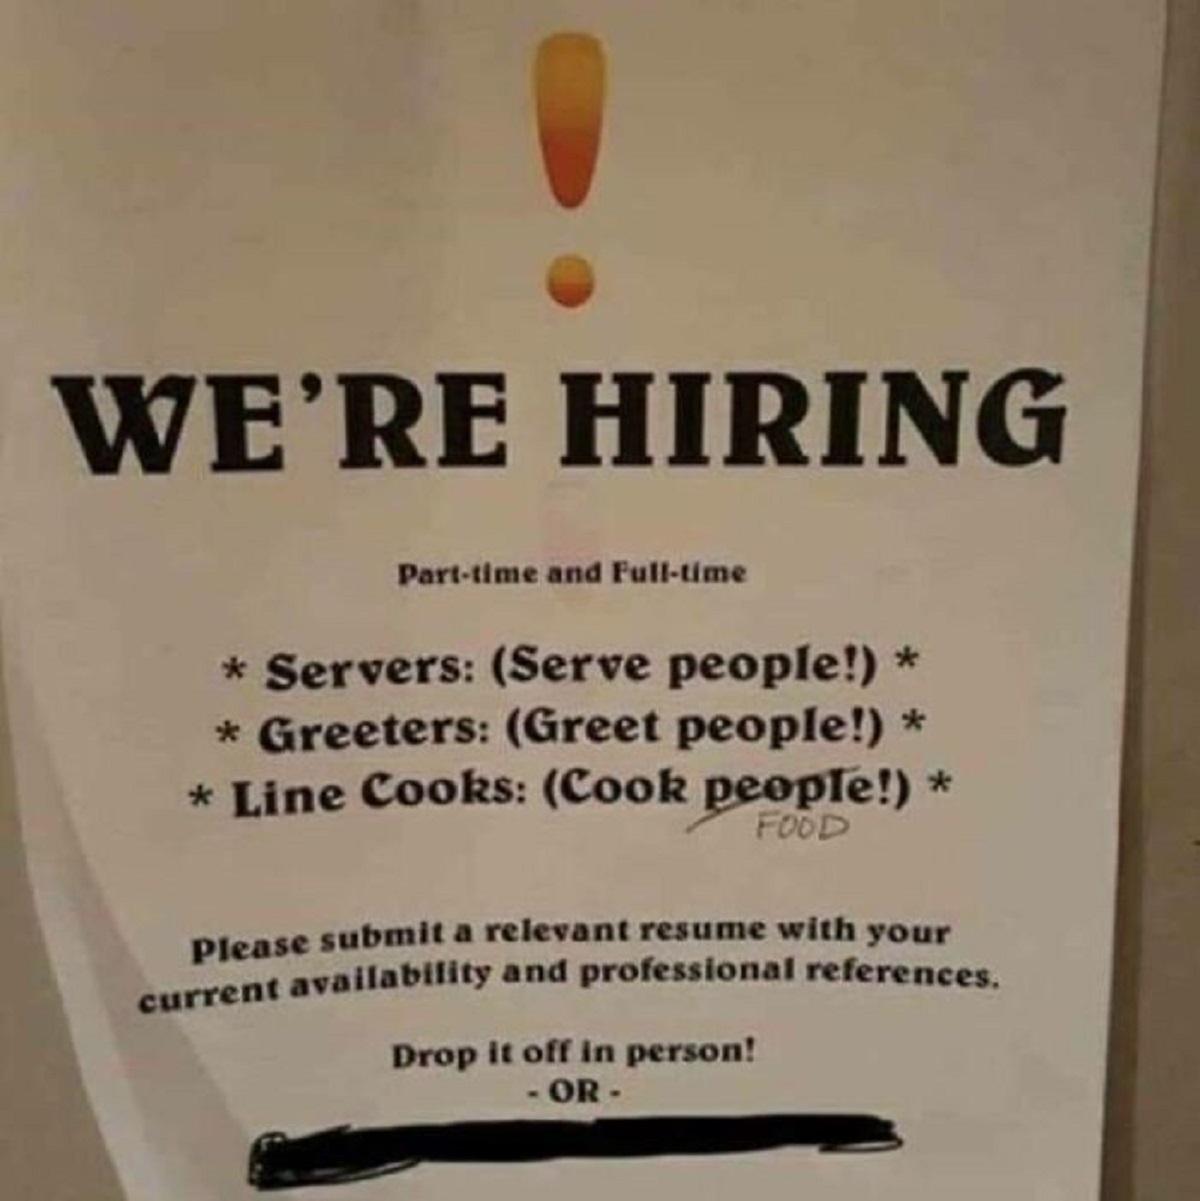 people who failed at their job - We'Re Hiring Parttime and Fulltime Servers Serve people! Greeters Greet people! Line Cooks Cook people! Food Please submit a relevant resume with your current availability and professional references. Drop it off in person